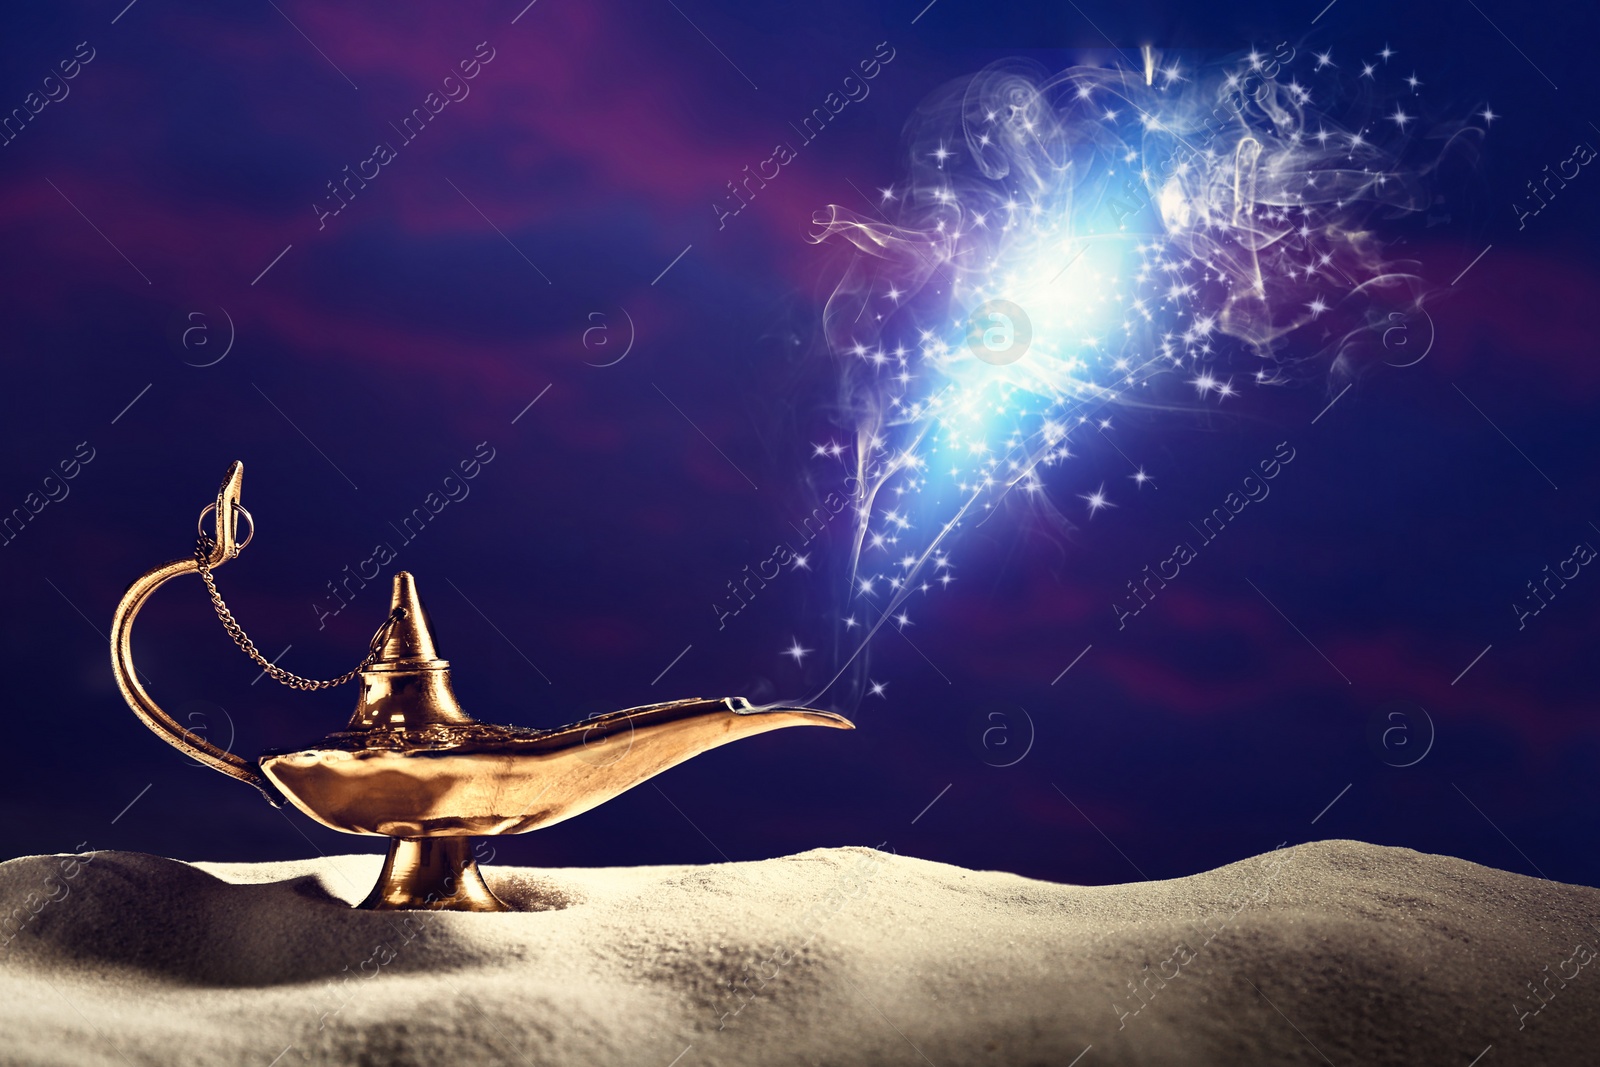 Image of Genie appearing from magic lamp of wishes. Fairy tale 